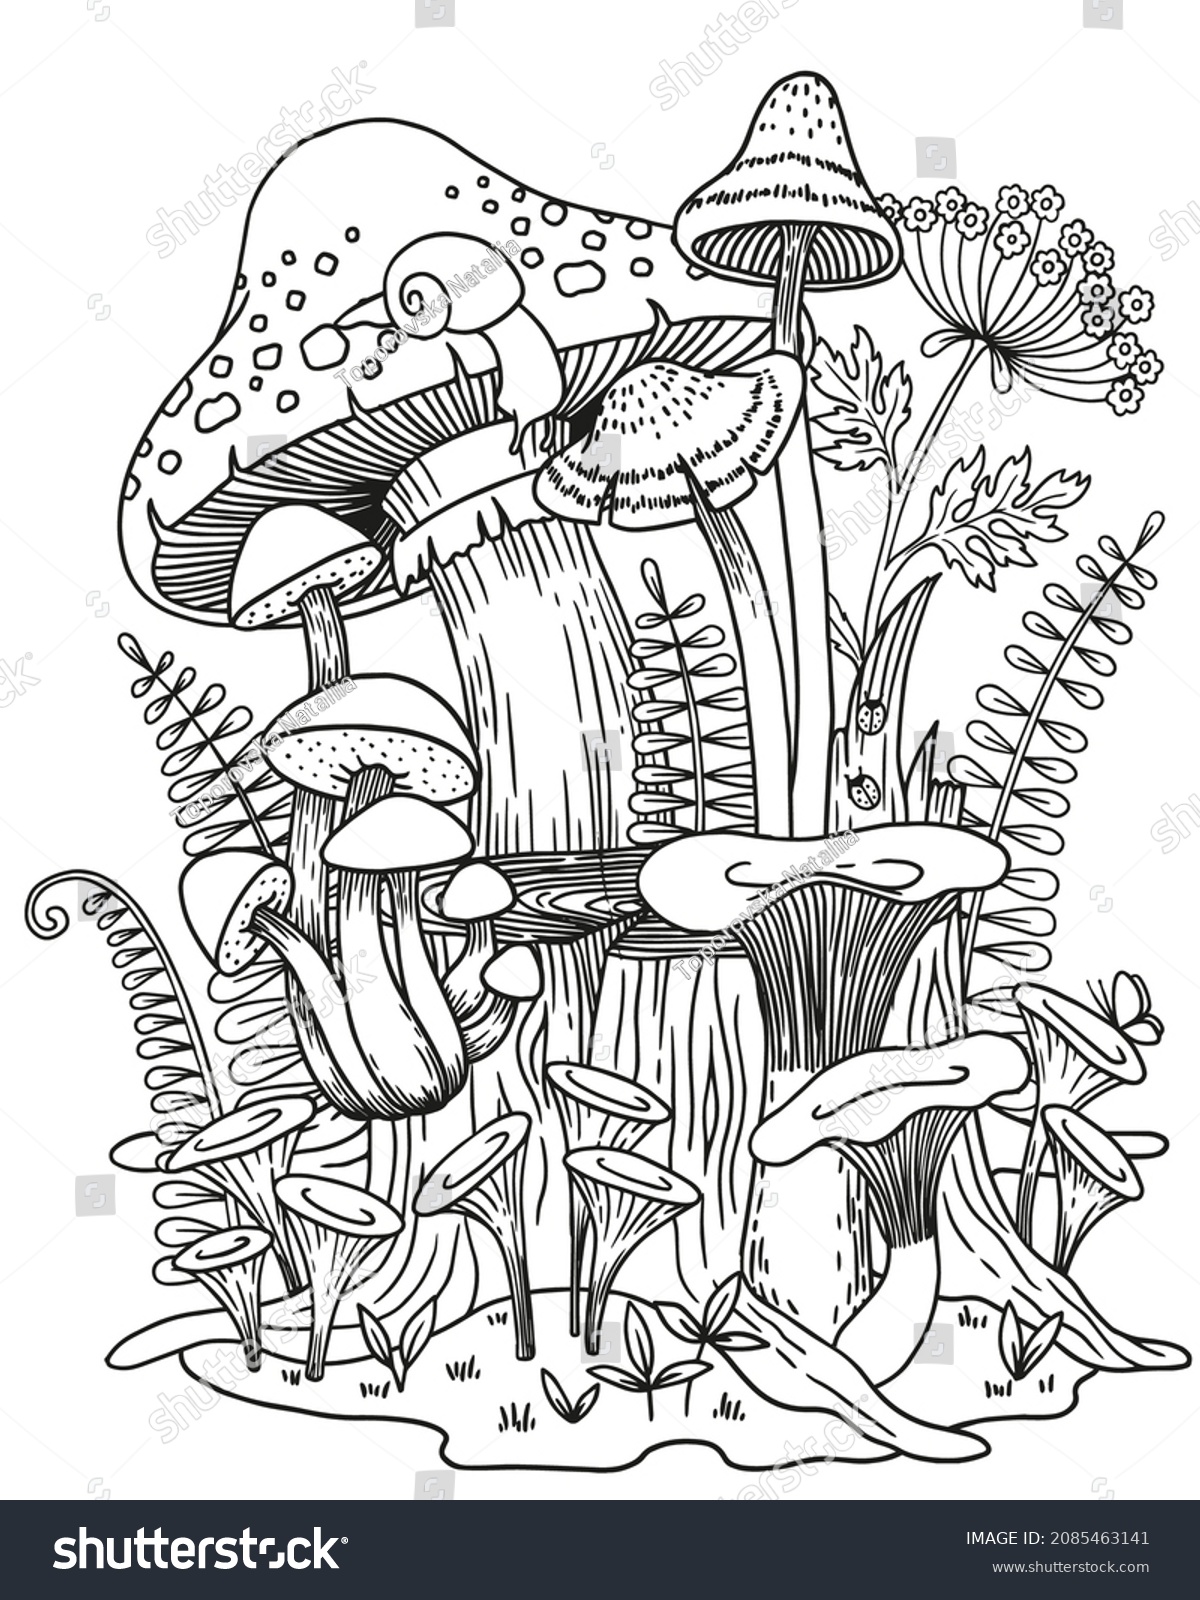 Adult coloring pages mushrooms images stock photos d objects vectors